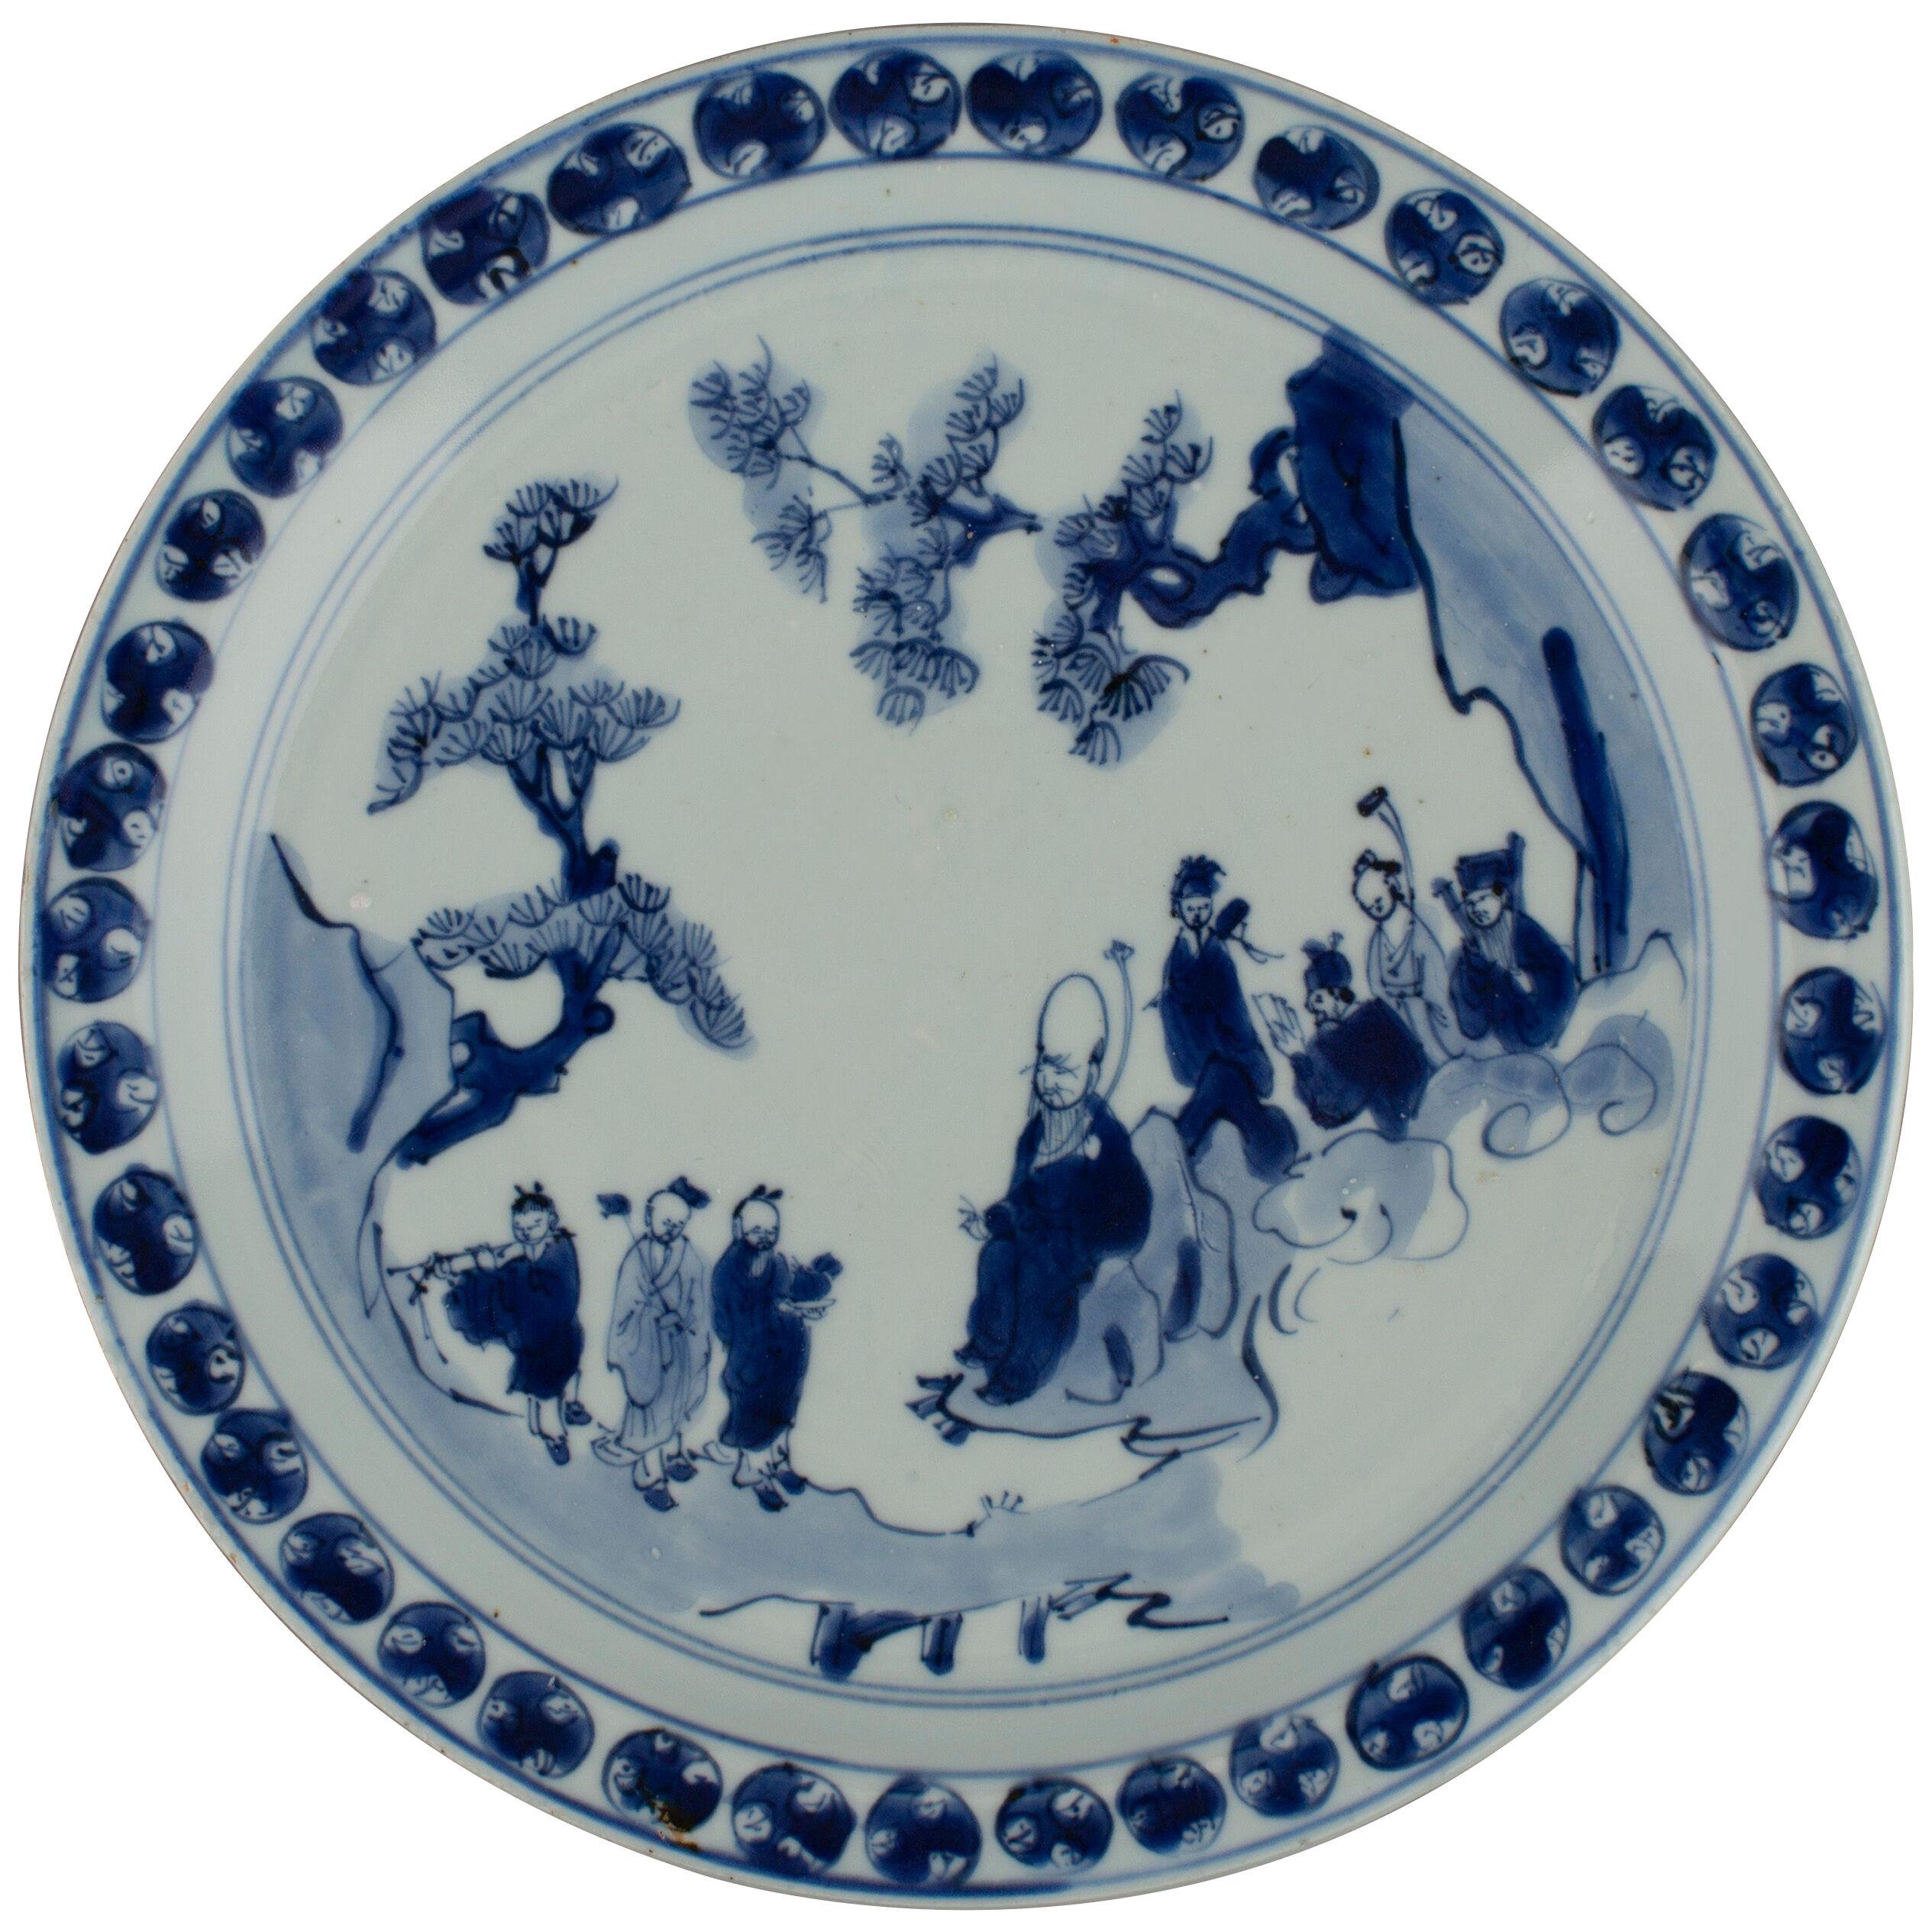 Chinese porcelain blue and white kosometsuke Shoulao and immortals plate